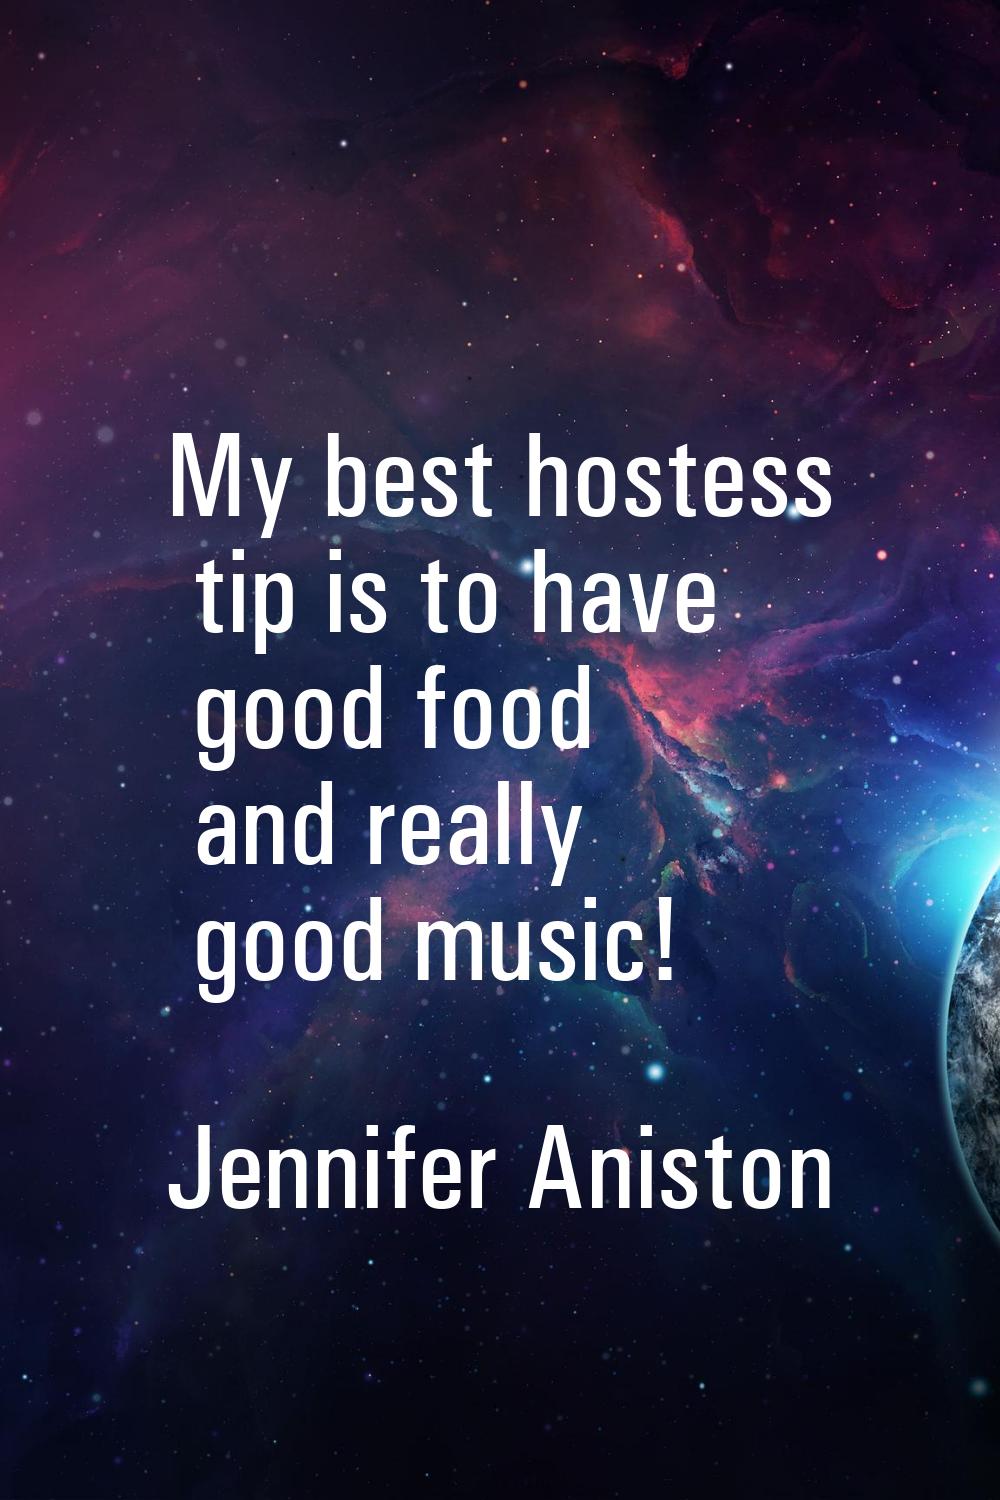 My best hostess tip is to have good food and really good music!